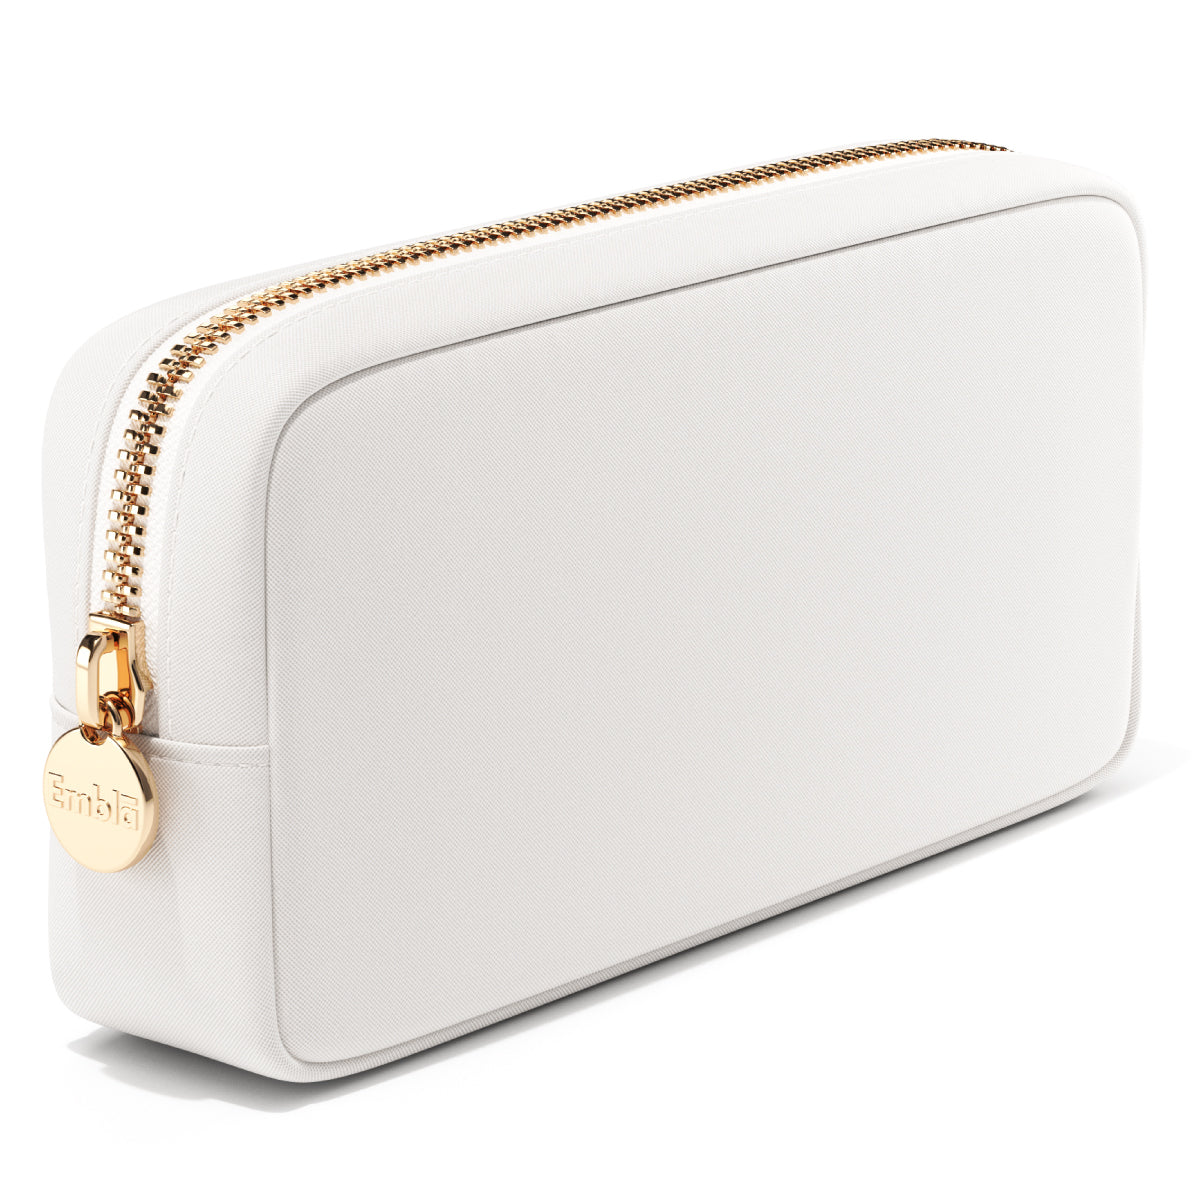 Embla The Small White Pouch